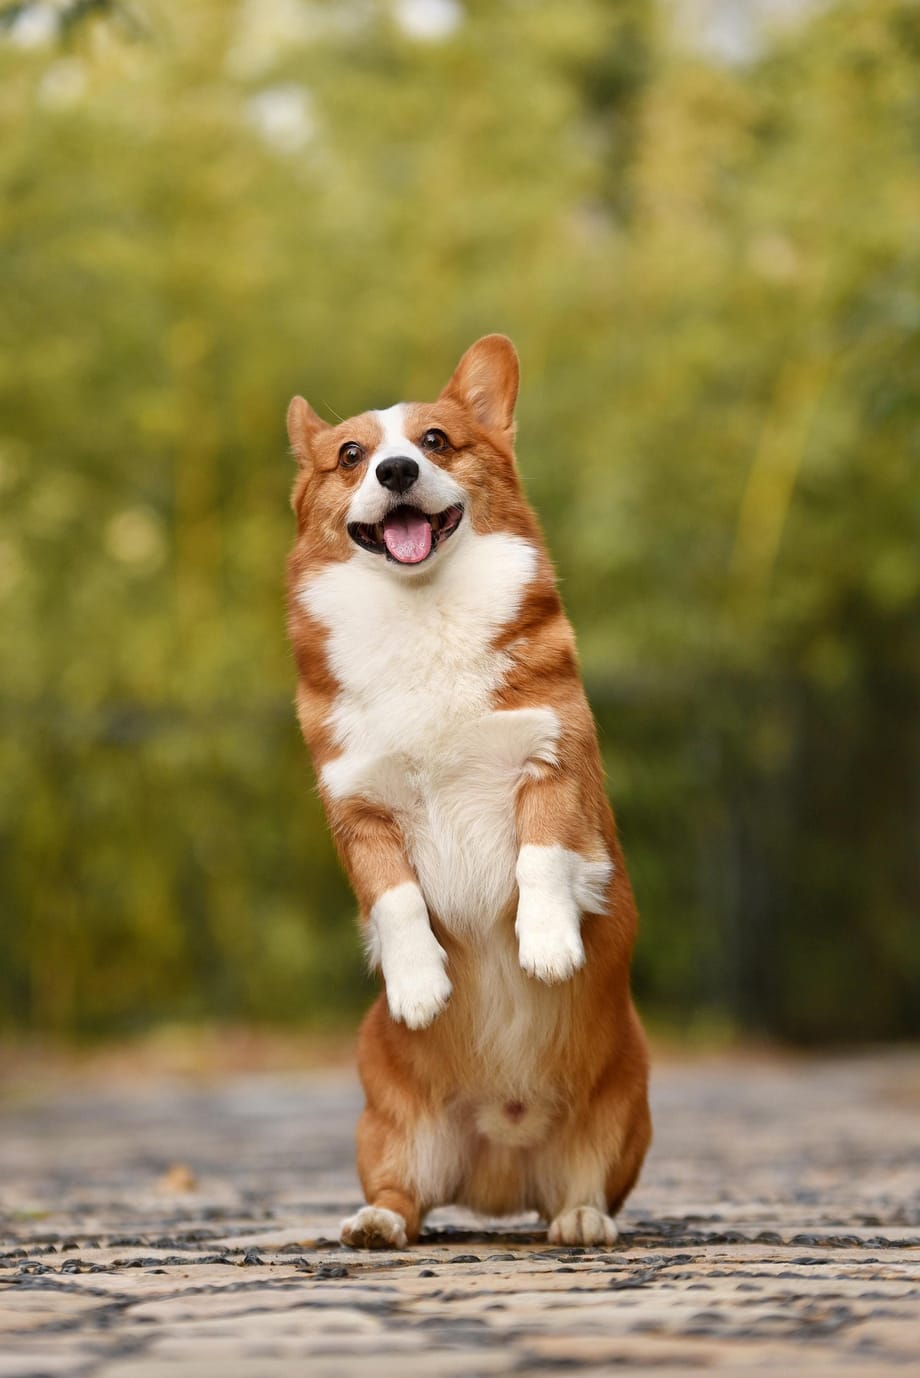 A dog standing up with its front paws raised and smiling